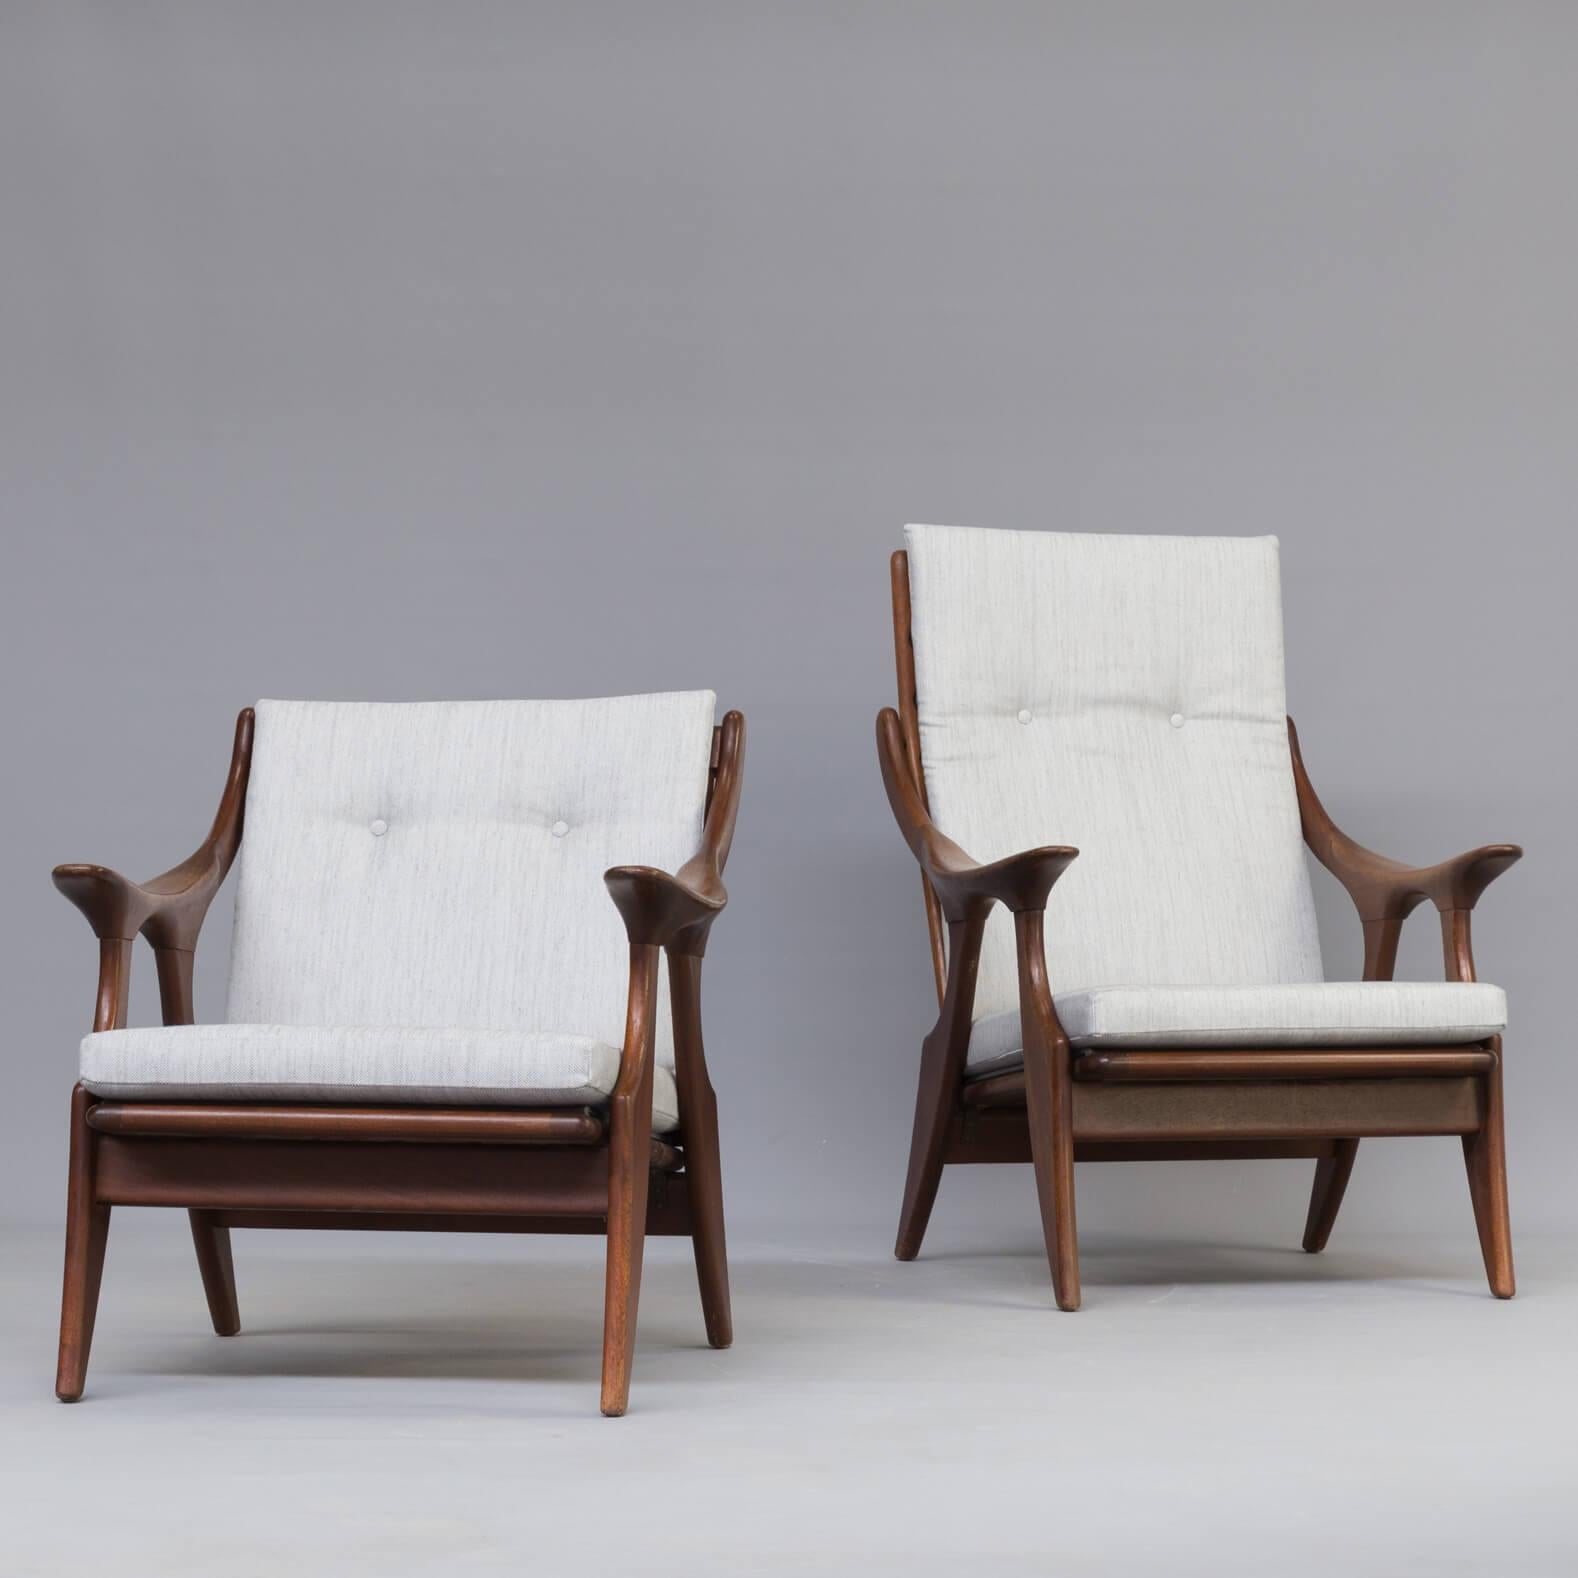 This teak ‘the Knot’ model armchairs were made by De Ster Gelderland in the 1960s. The teak frames have an organic design with a detail shaped like a knot. It is new upholstered in a soft grey beautiful and high quality fabric, fully upholstered in